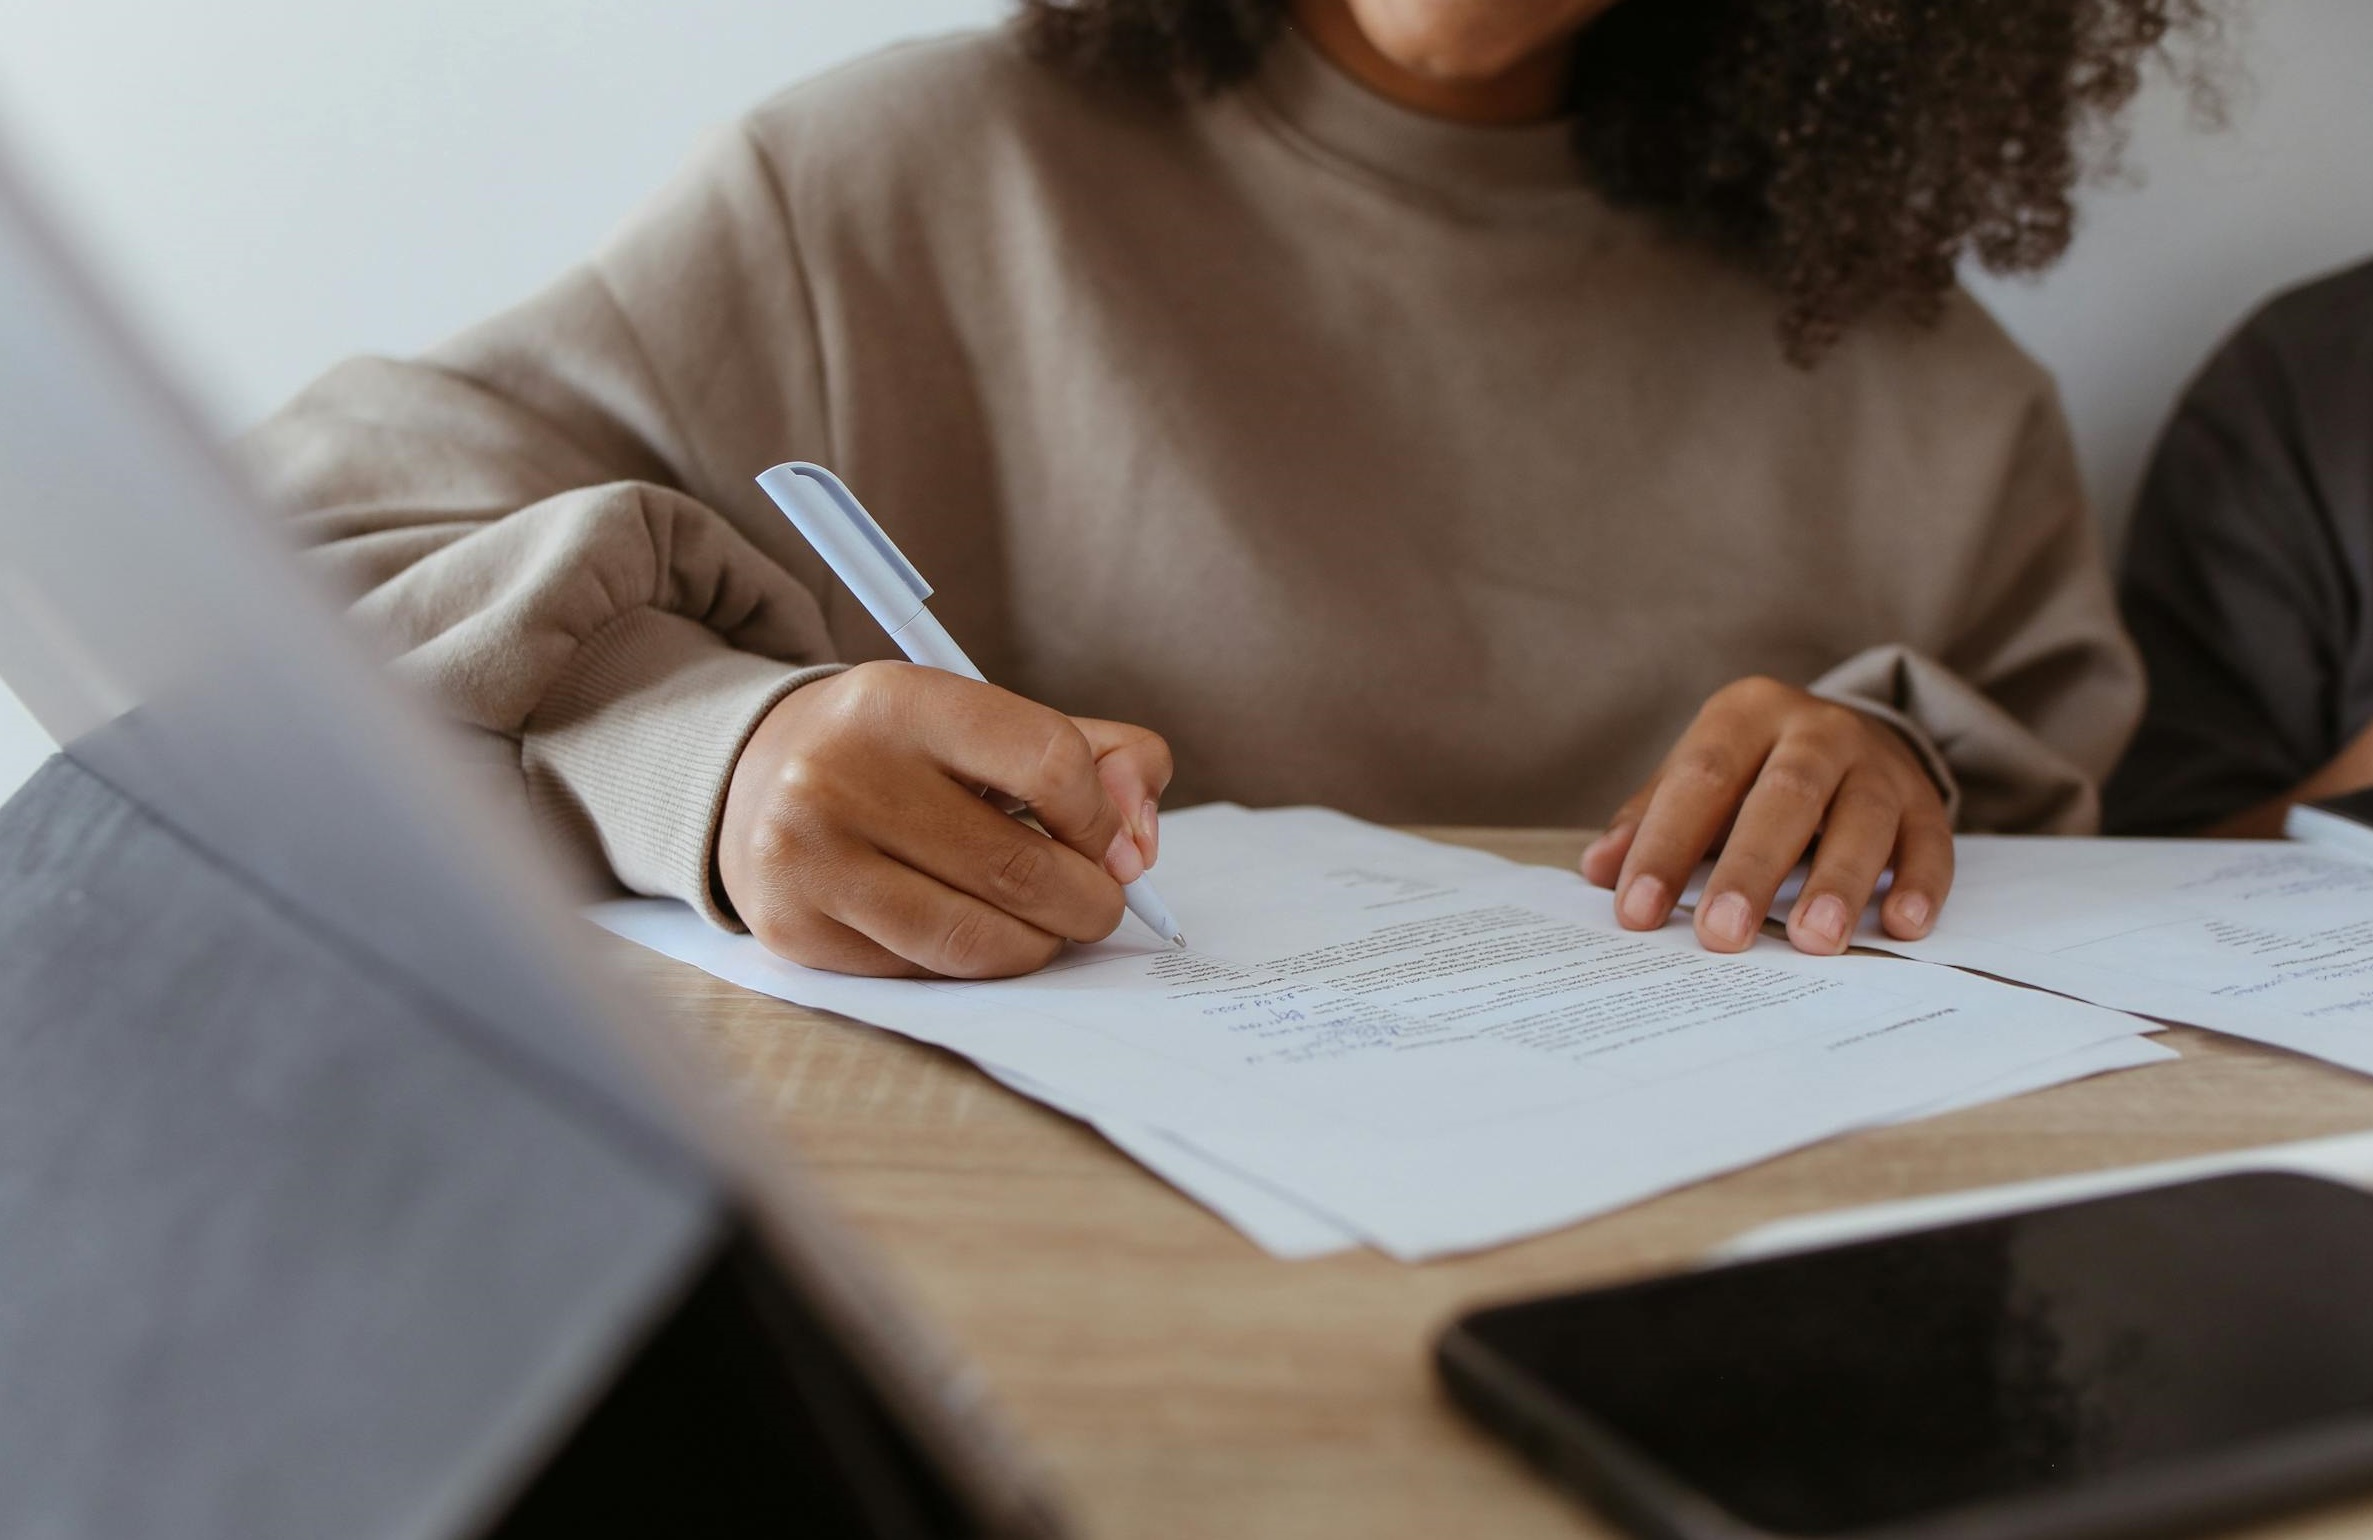 A woman signing paperwork | Source: Pexels